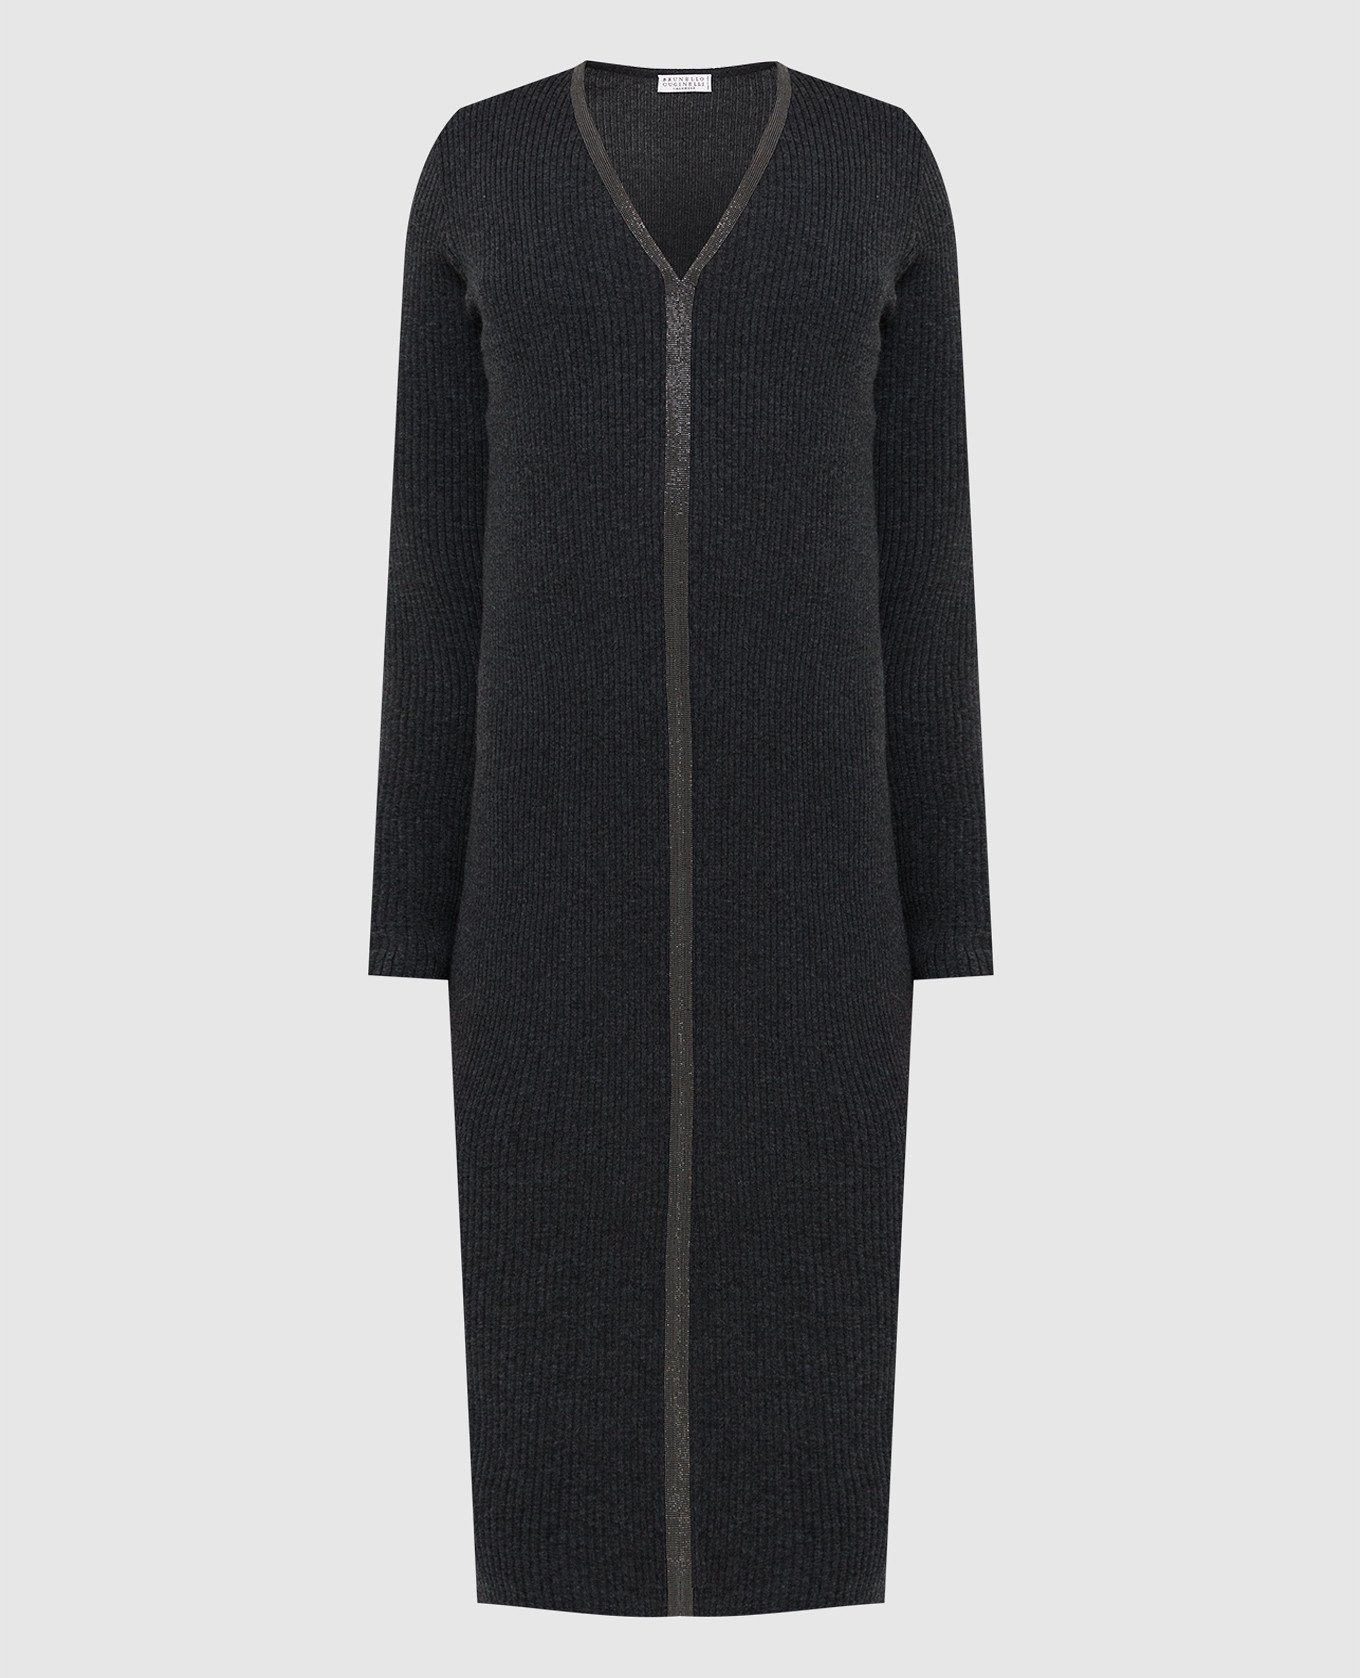 Charcoal cashmere dress with chains